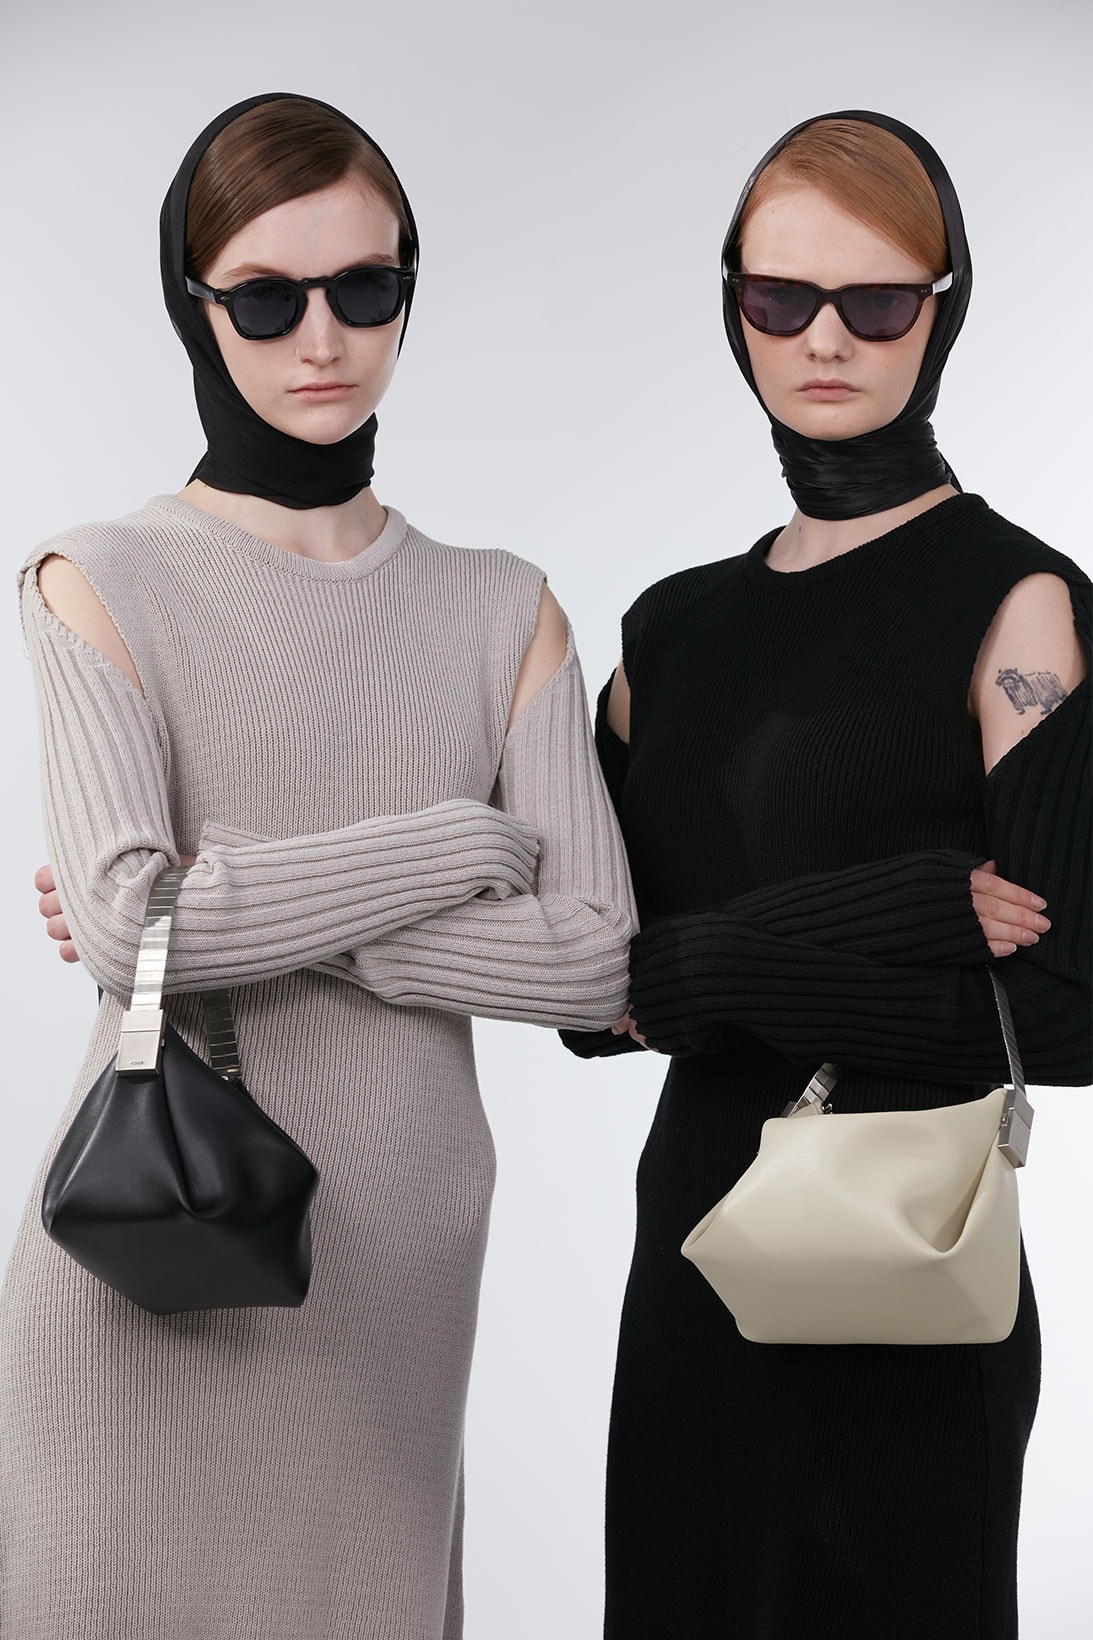 osoi spring summer ss21 collection campaign hustle and bustle handbag dresses sunglasses